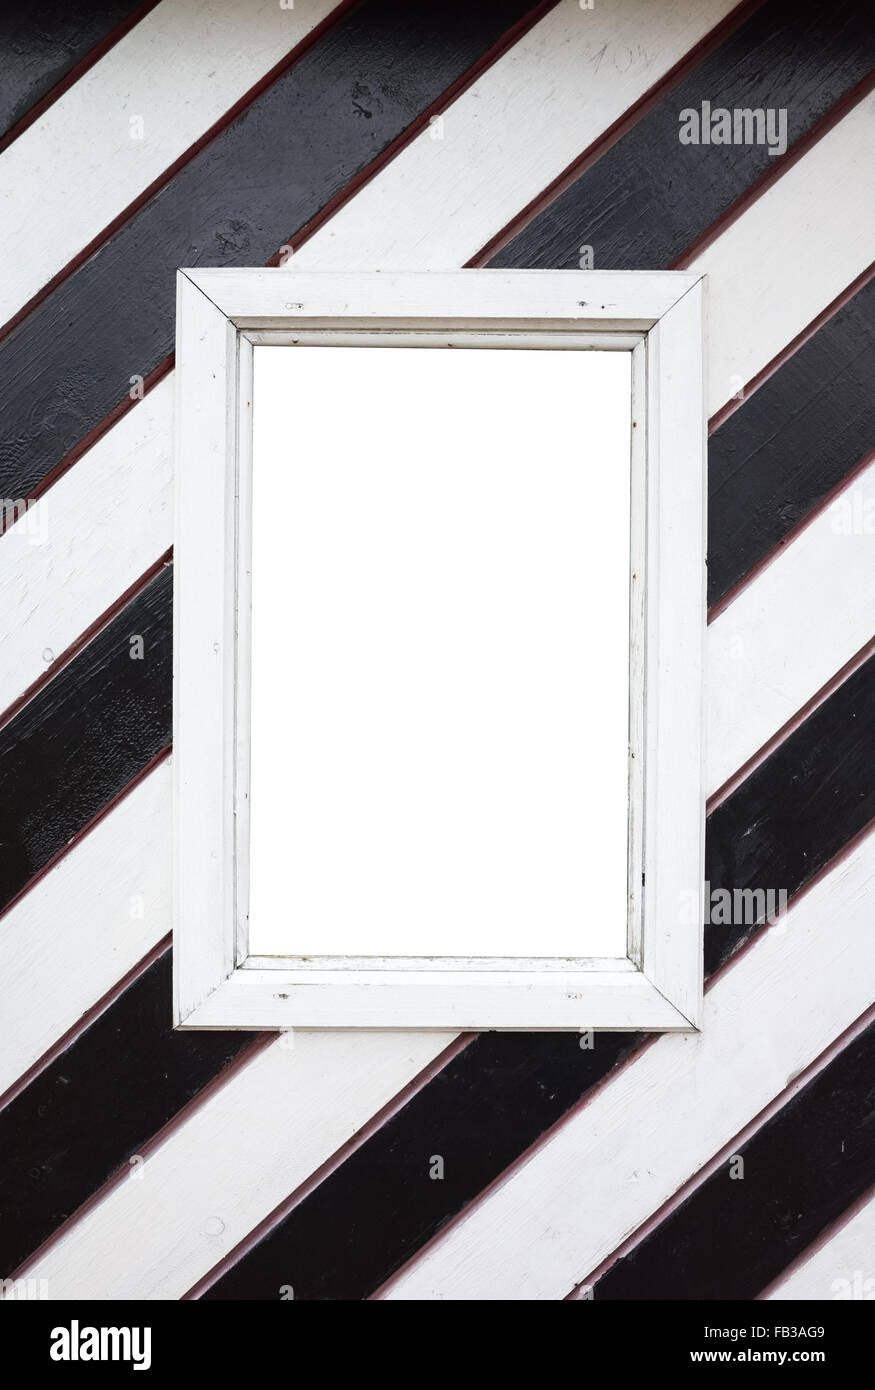 Empty window in wooden wall with black and white diagonal striped pattern Stock Photo